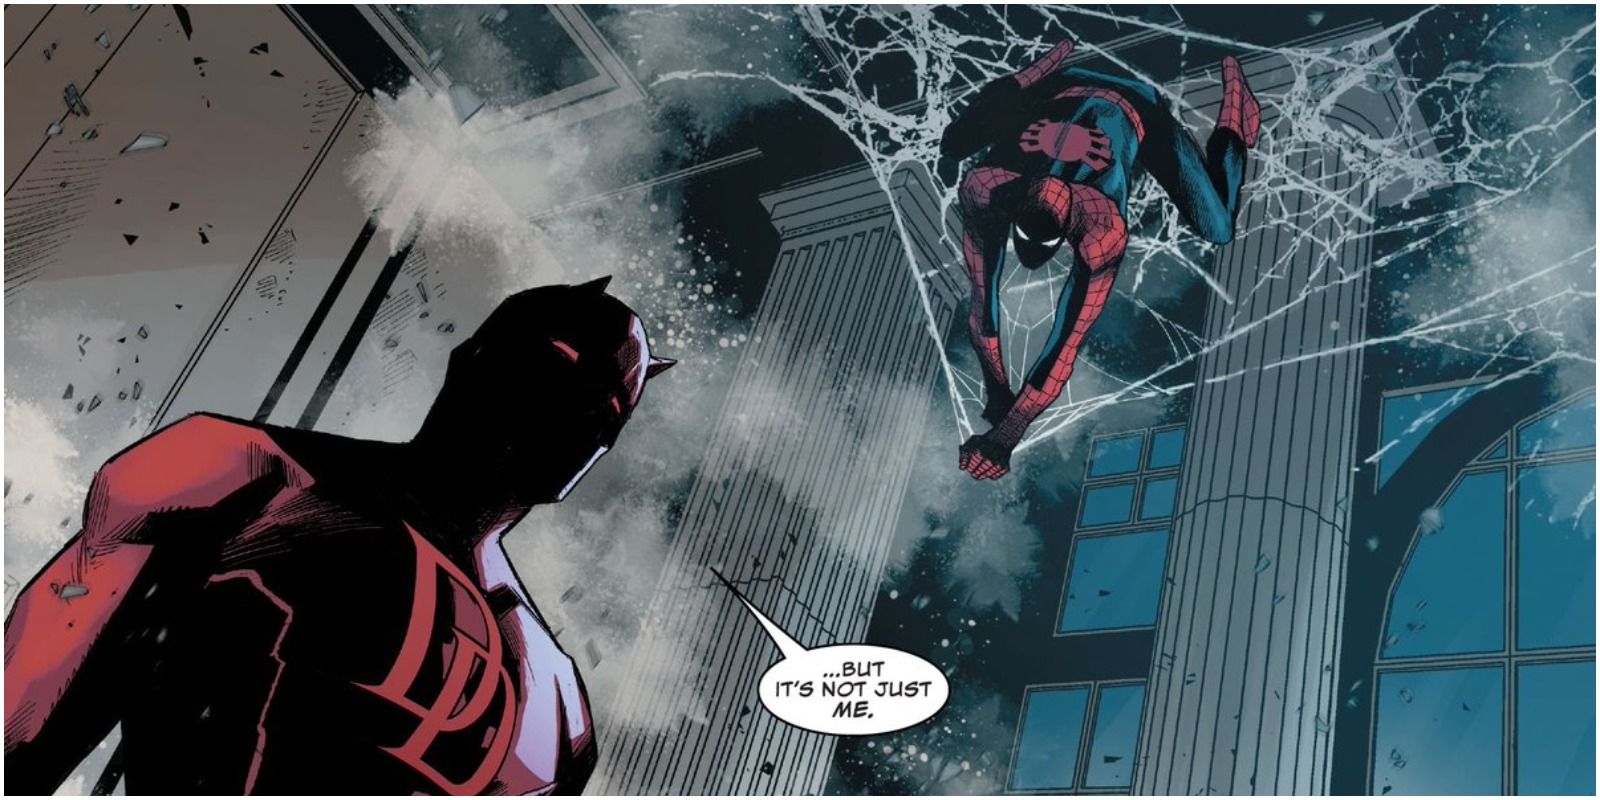 Spider-Man hanging in a web above Daredevil